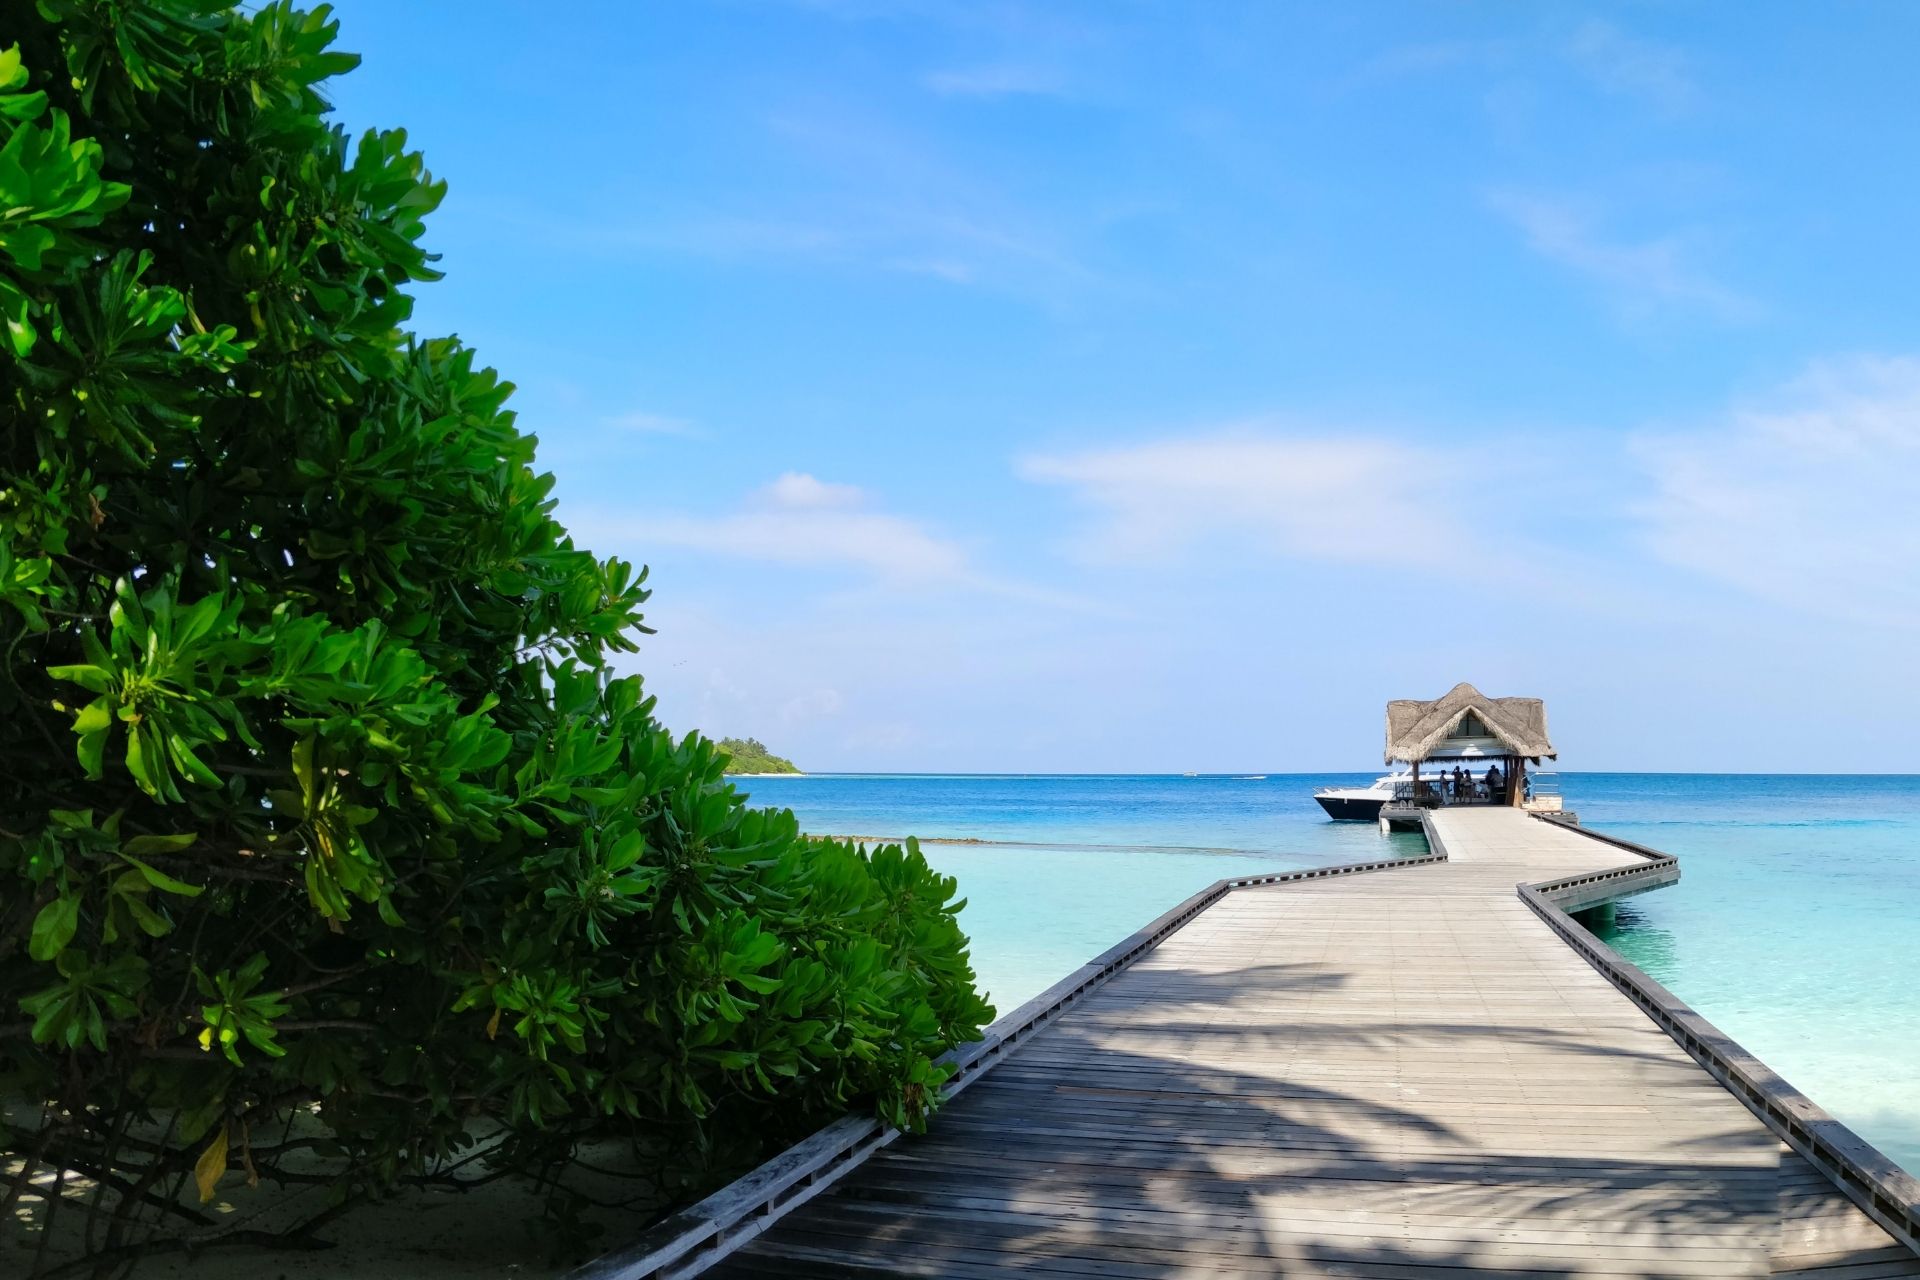 maldives travel requirements from india